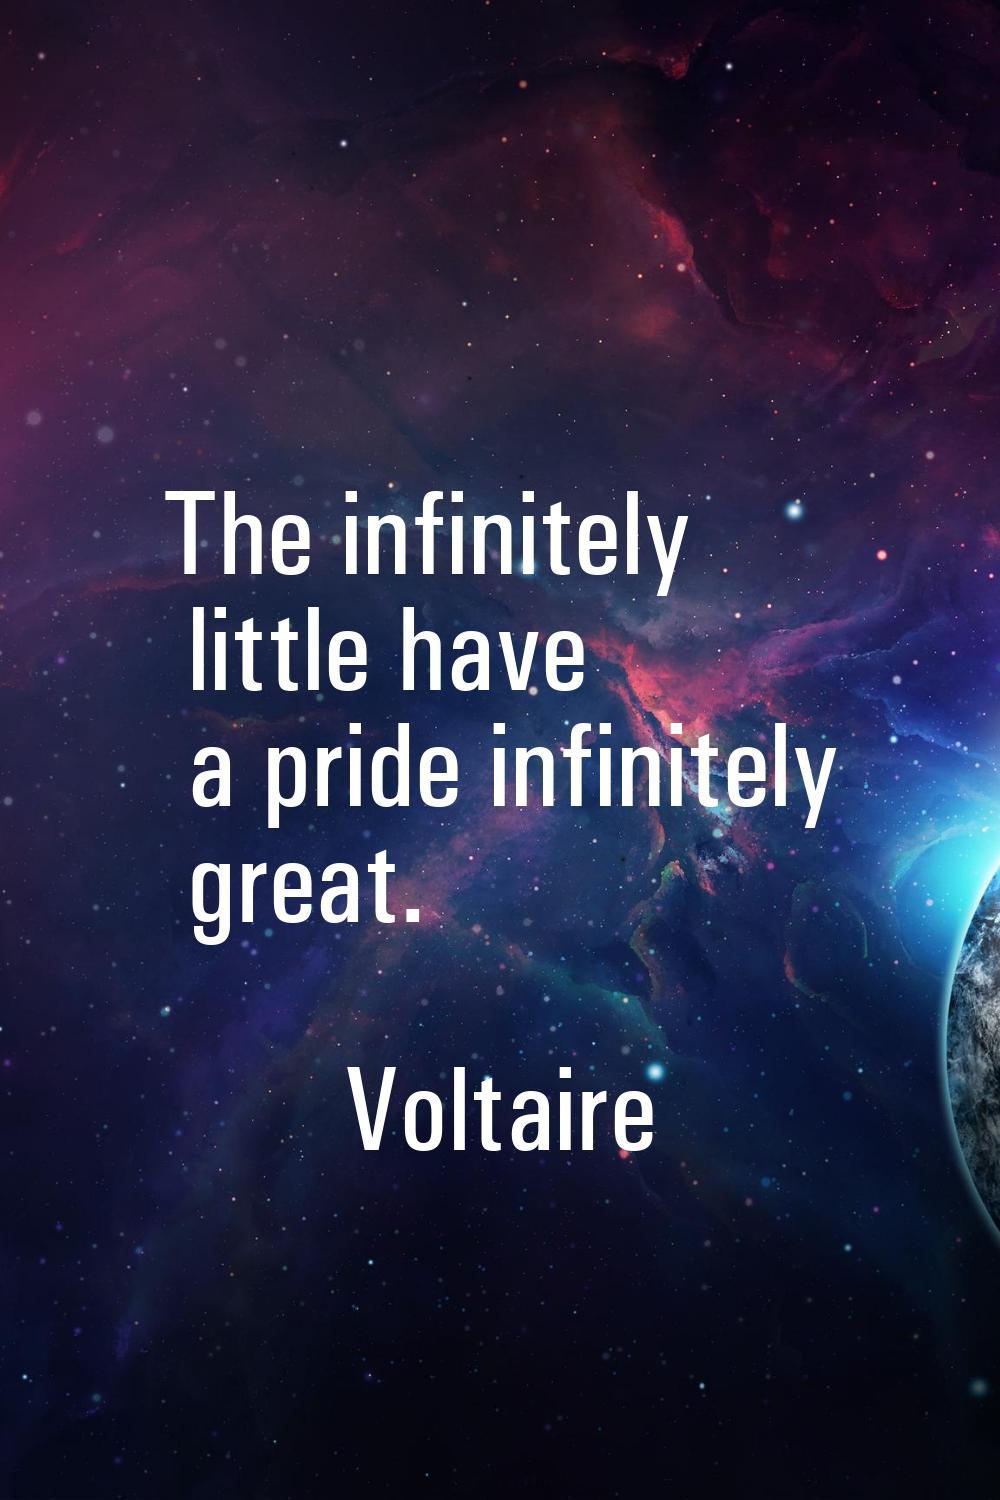 The infinitely little have a pride infinitely great.